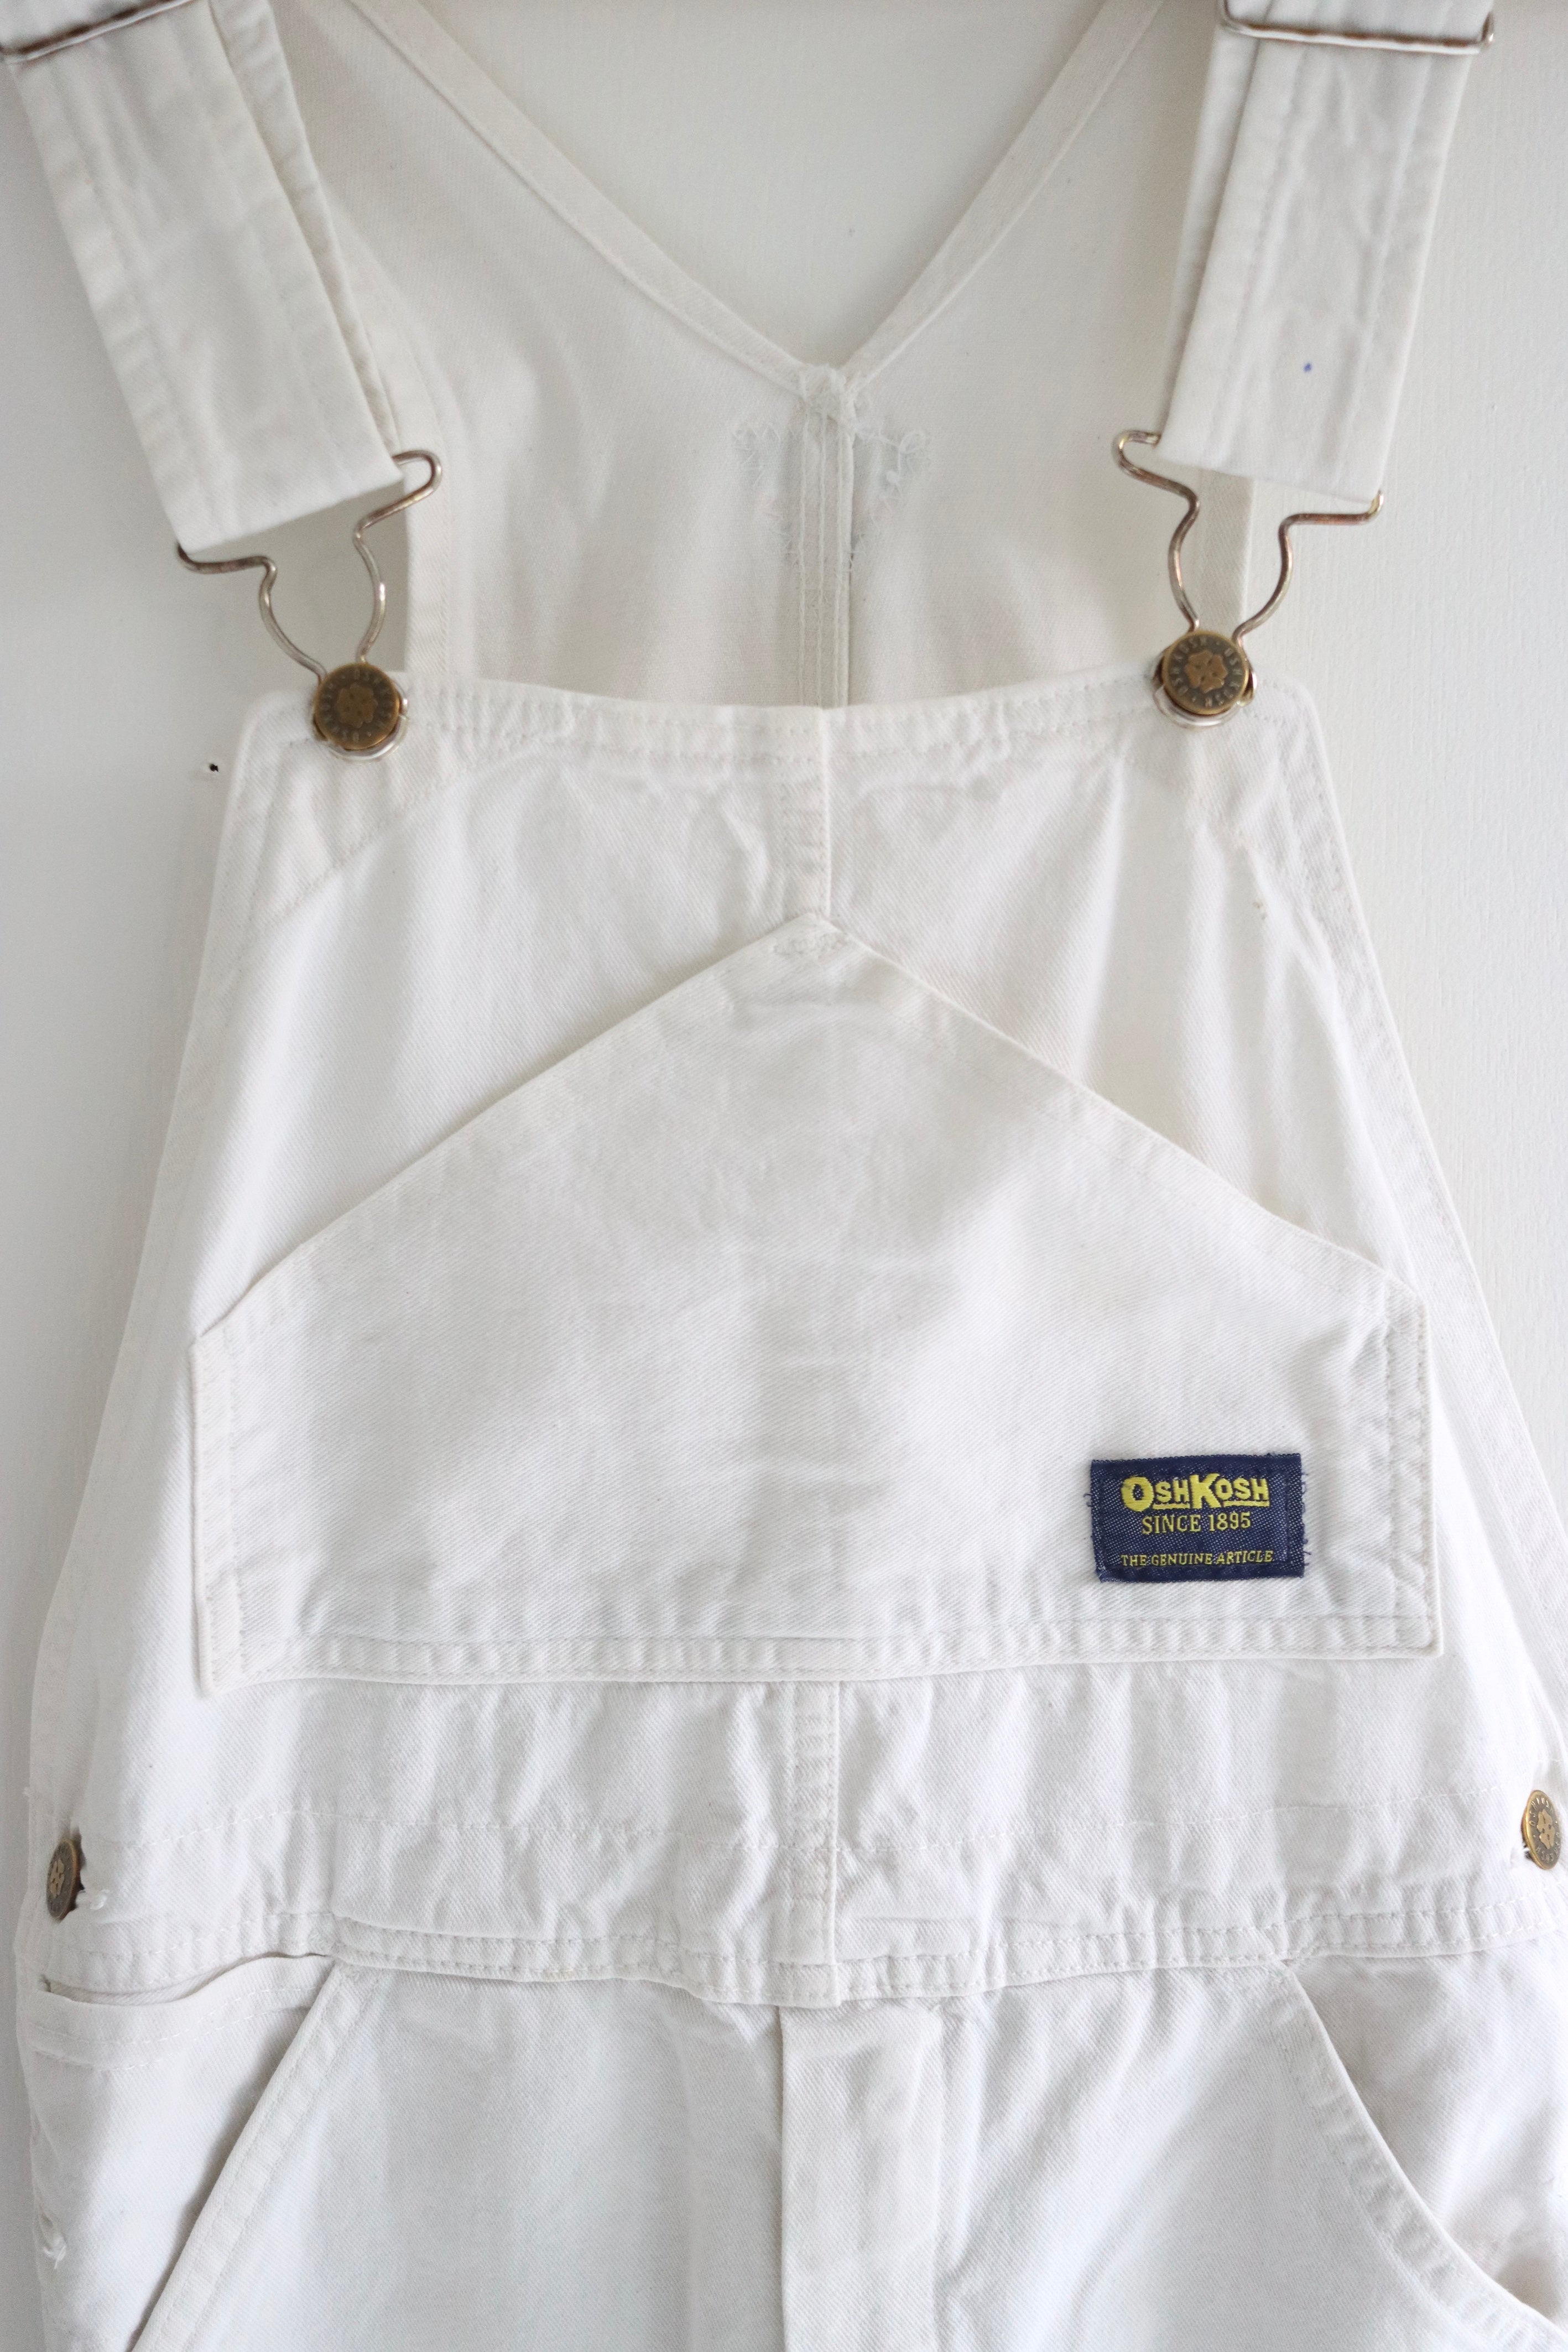 Vintage white canvas painter OshKosh overalls (adult)  - Size S/M - made in USA